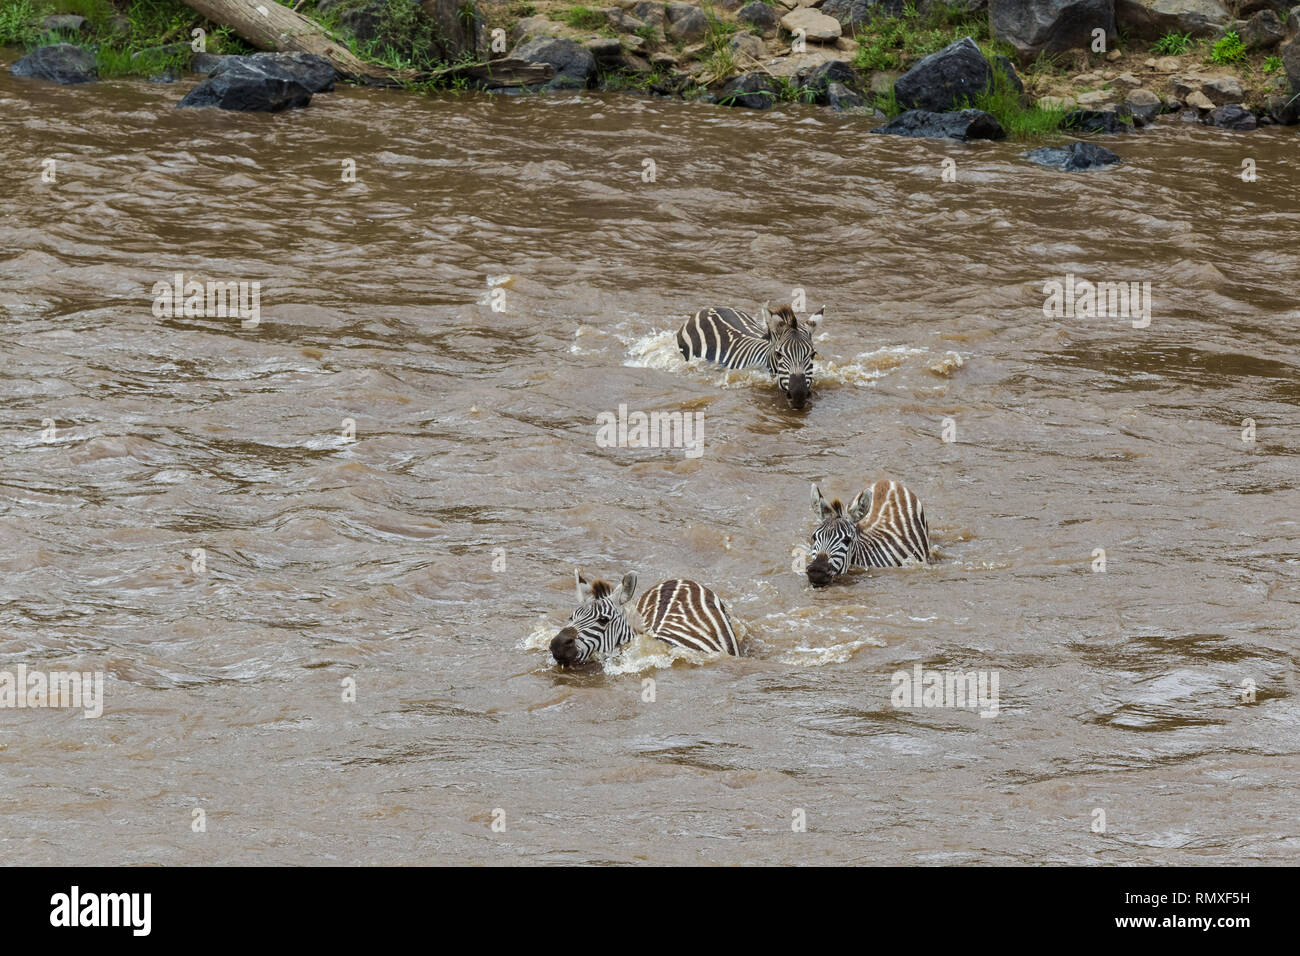 The crossing of zebras on the opposite bank of the Mara River. Kenya, Africa Stock Photo